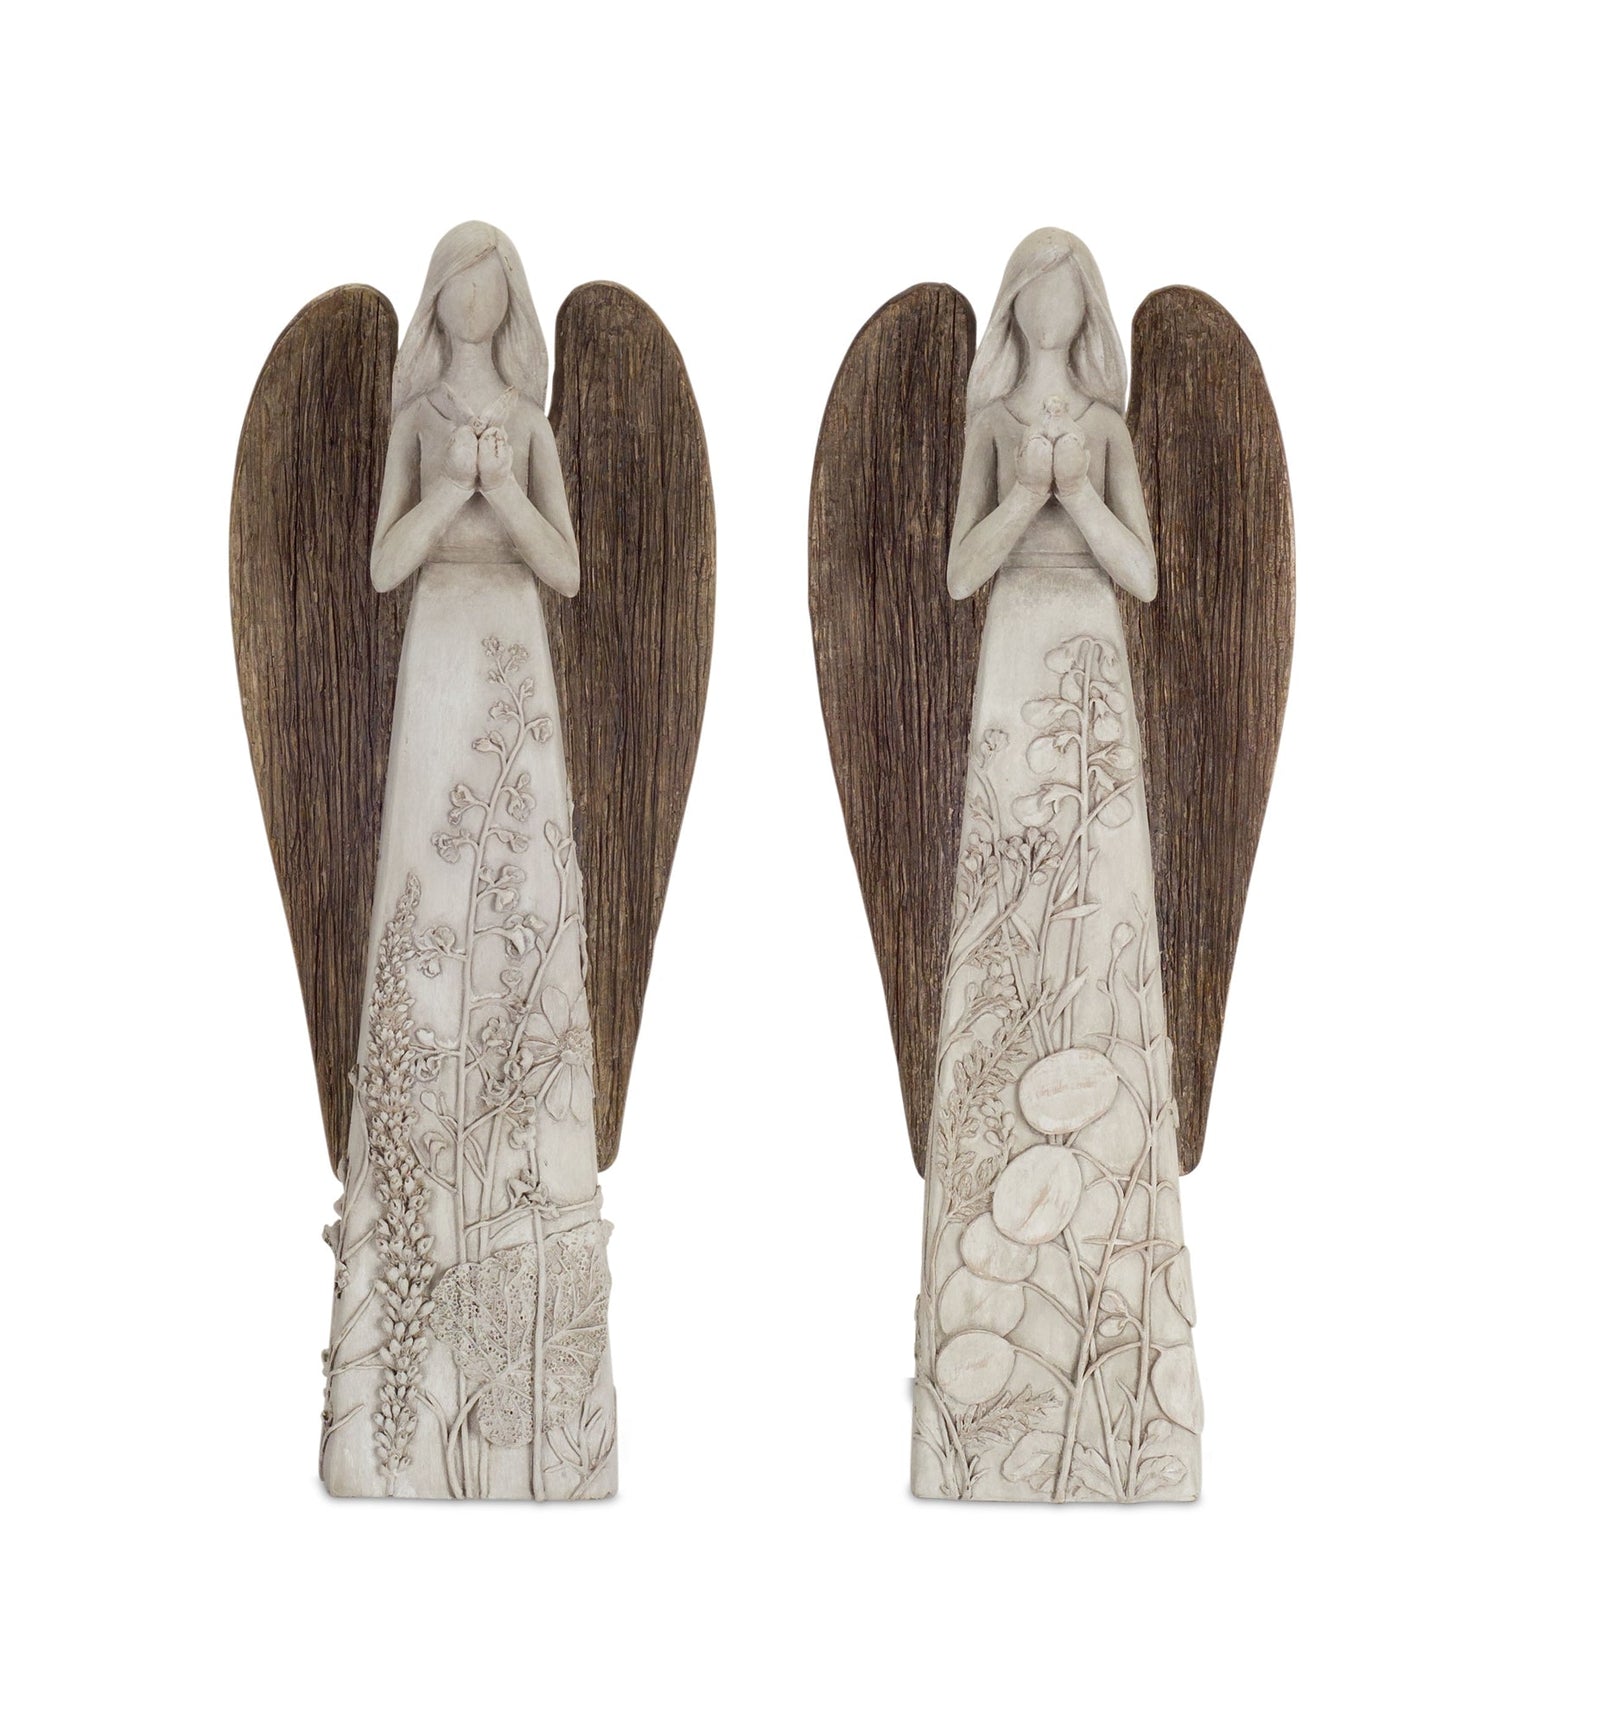 Floral Sculpted Angel with Wood Style Wings, Set of 2 – Pier 1